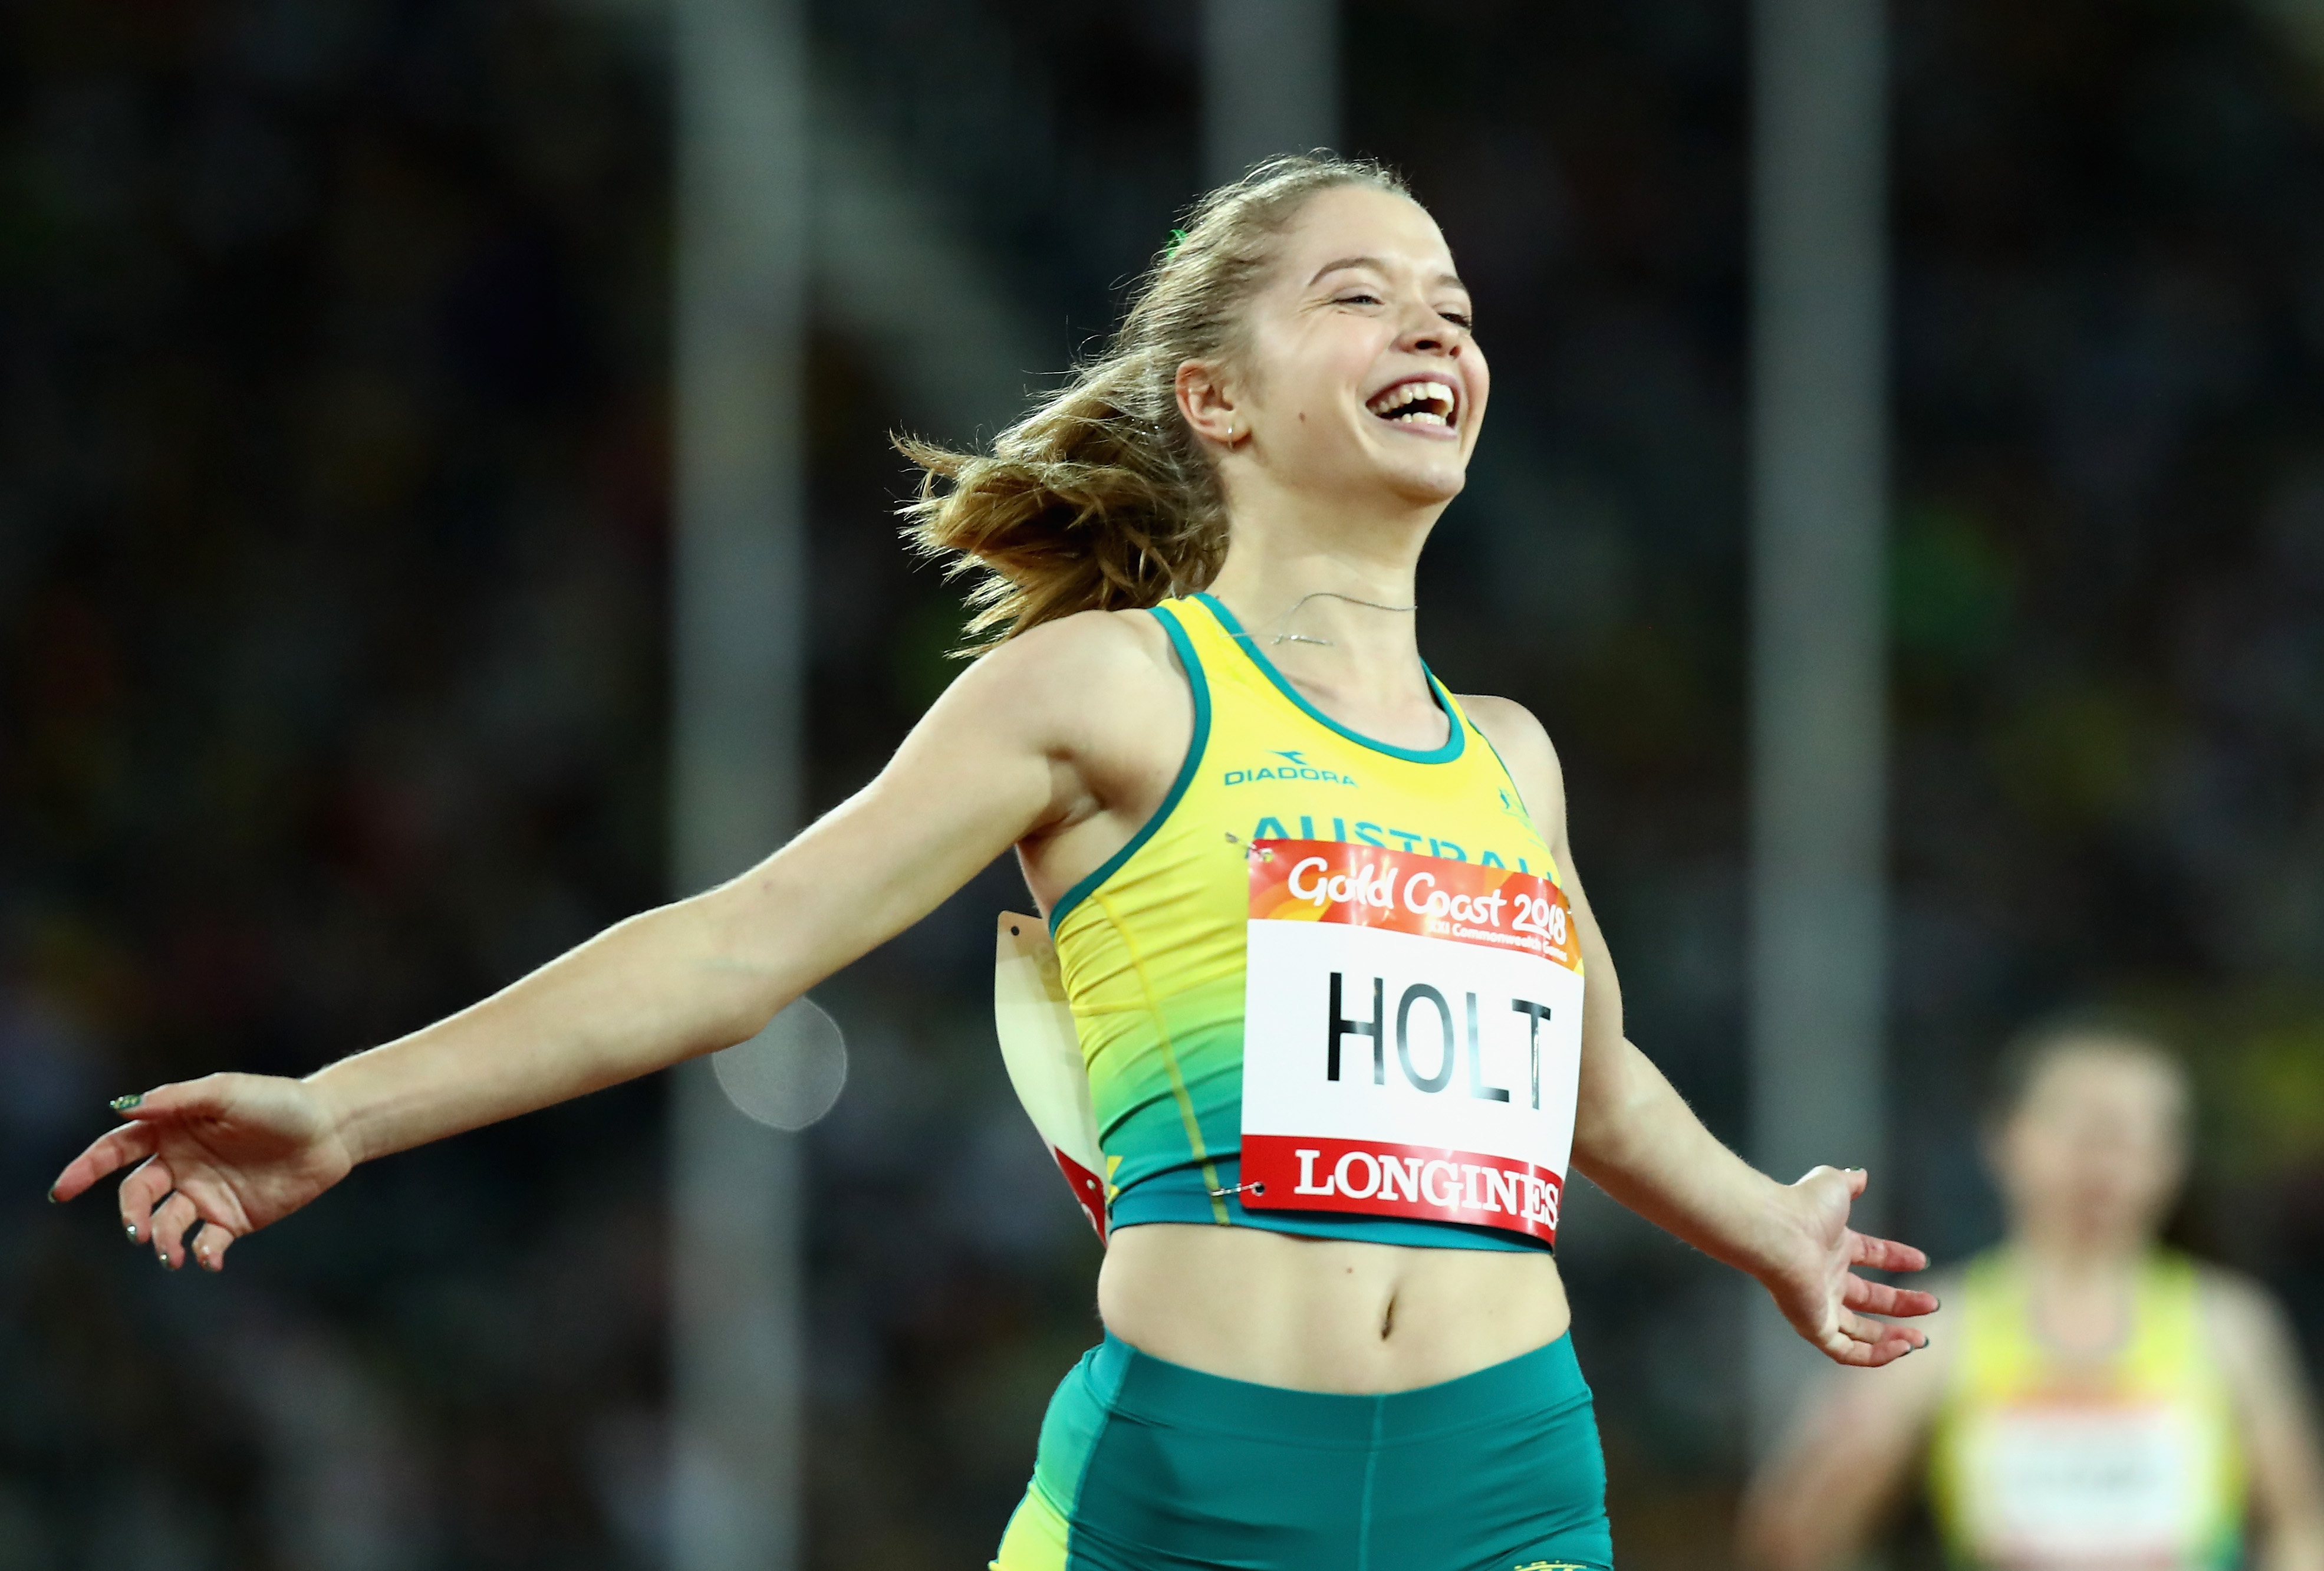 Gold Coast 2018: Isis Holt leads hosts' golden charge | International